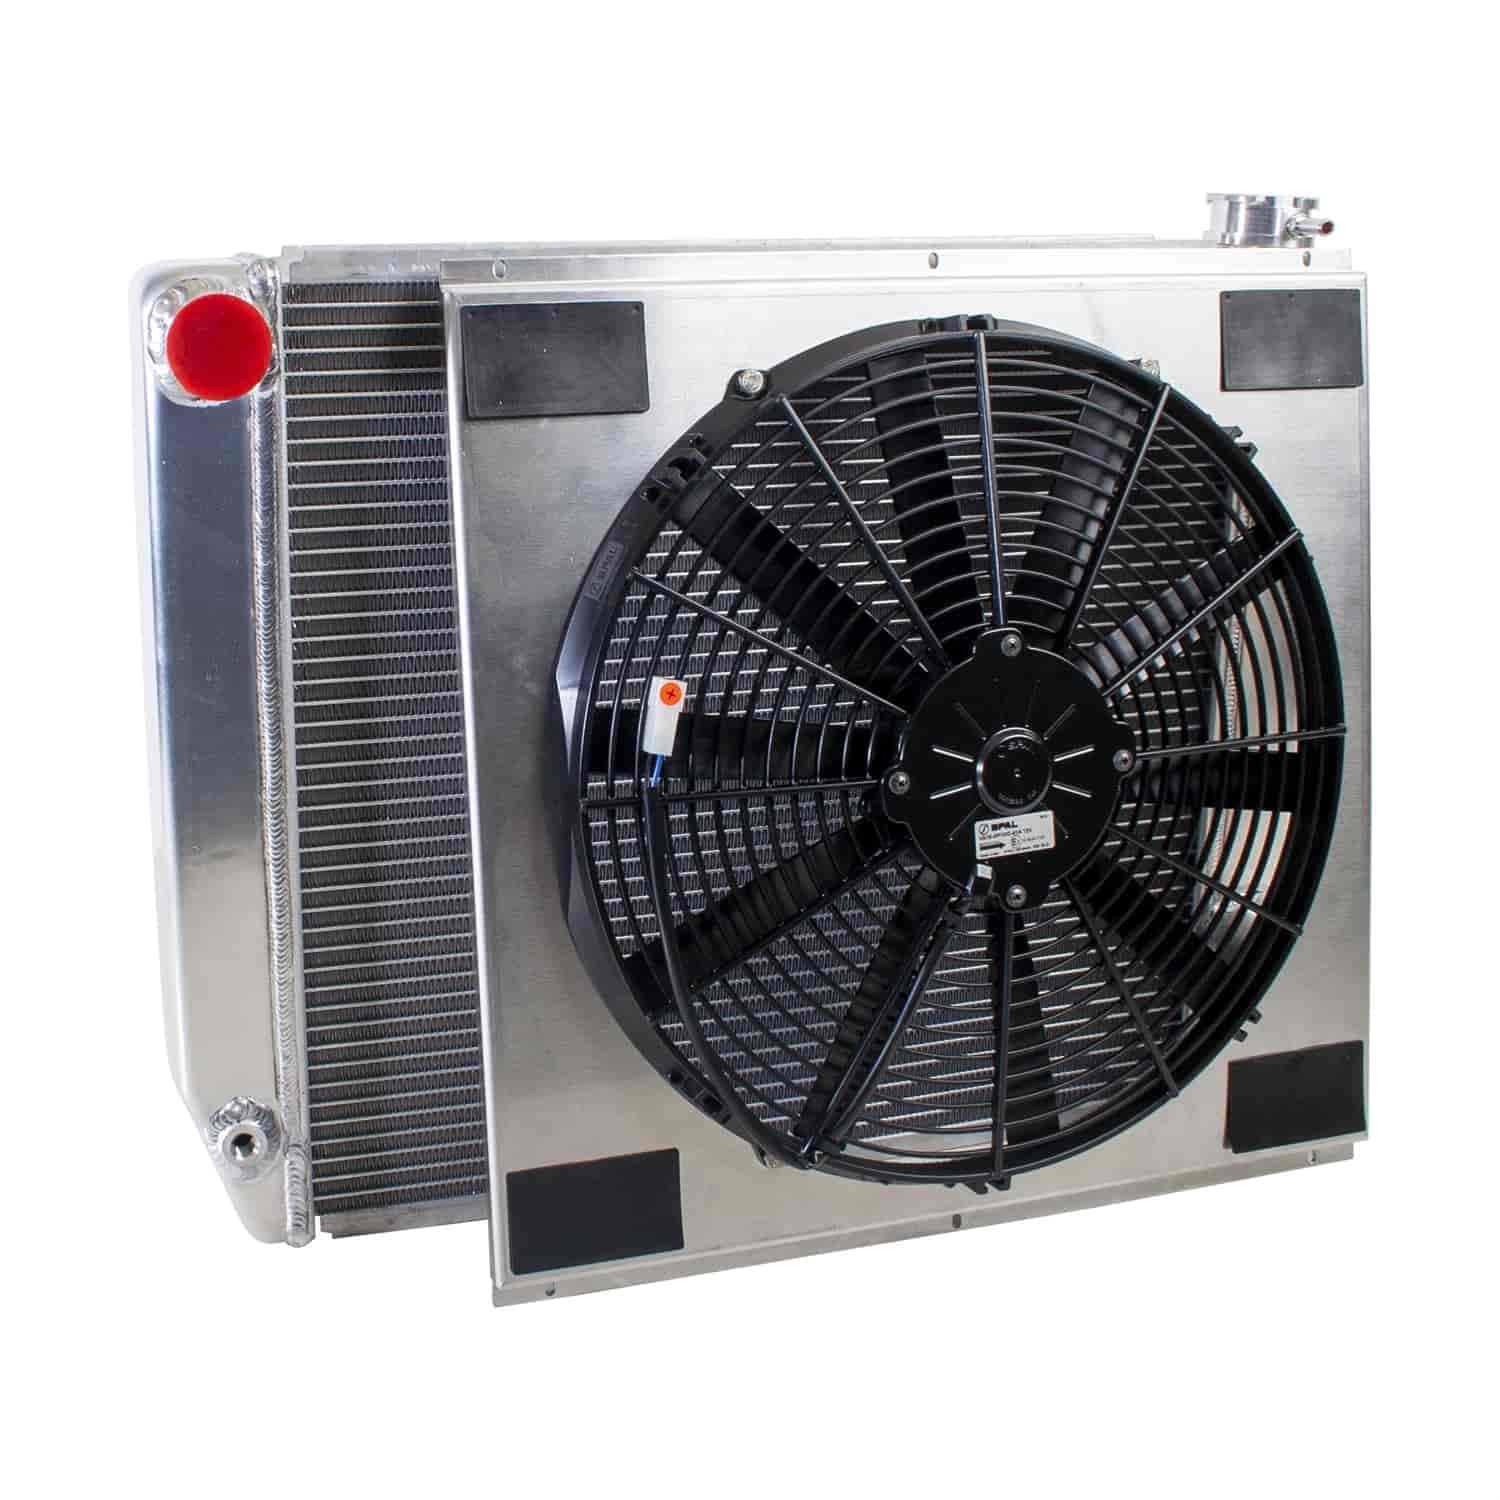 ClassicCool ComboUnit Universal Fit Radiator and Fan Single Pass Crossflow Design 24" x 19" with No Options